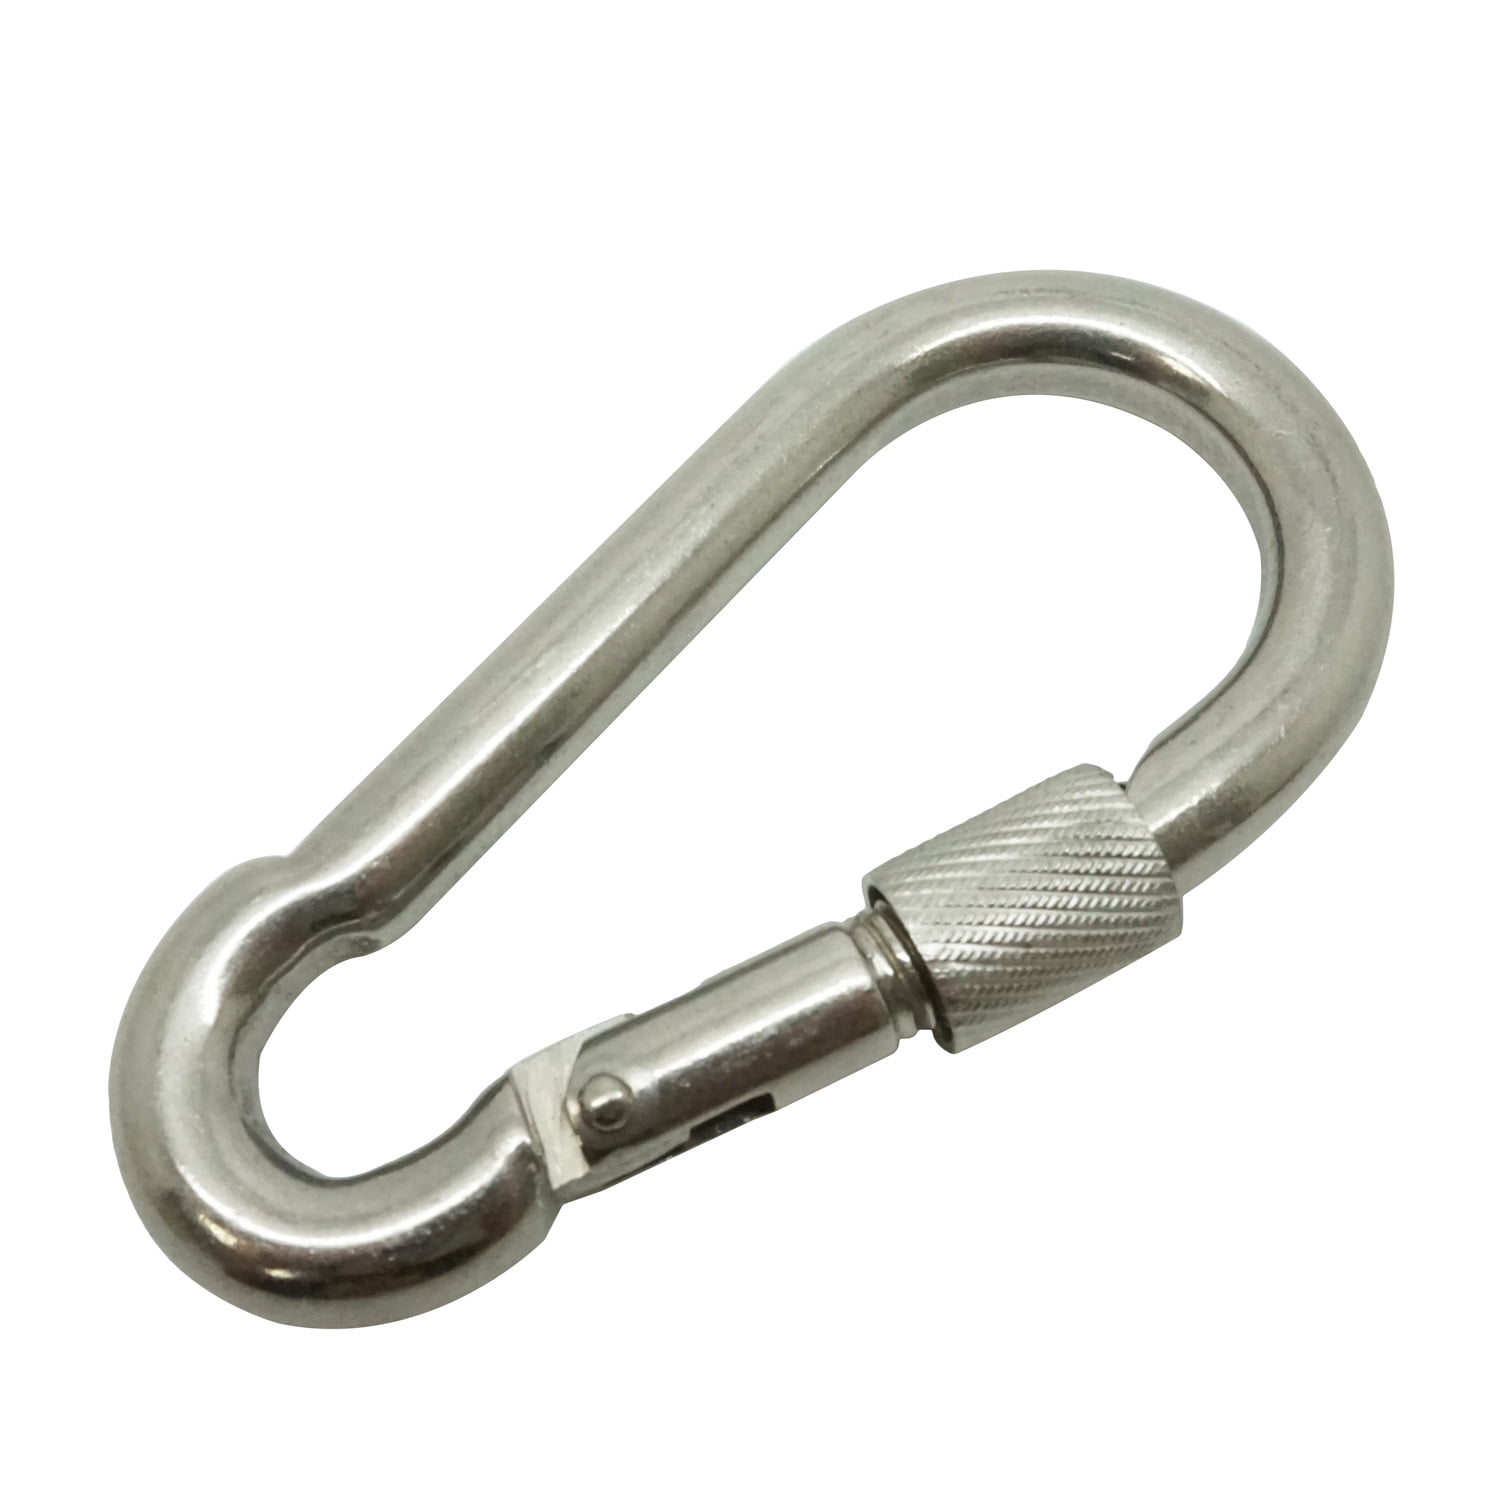 3" Scuba Choice Boat Marine Clip Stainless Steel Safety Spring Hook Carabiner 